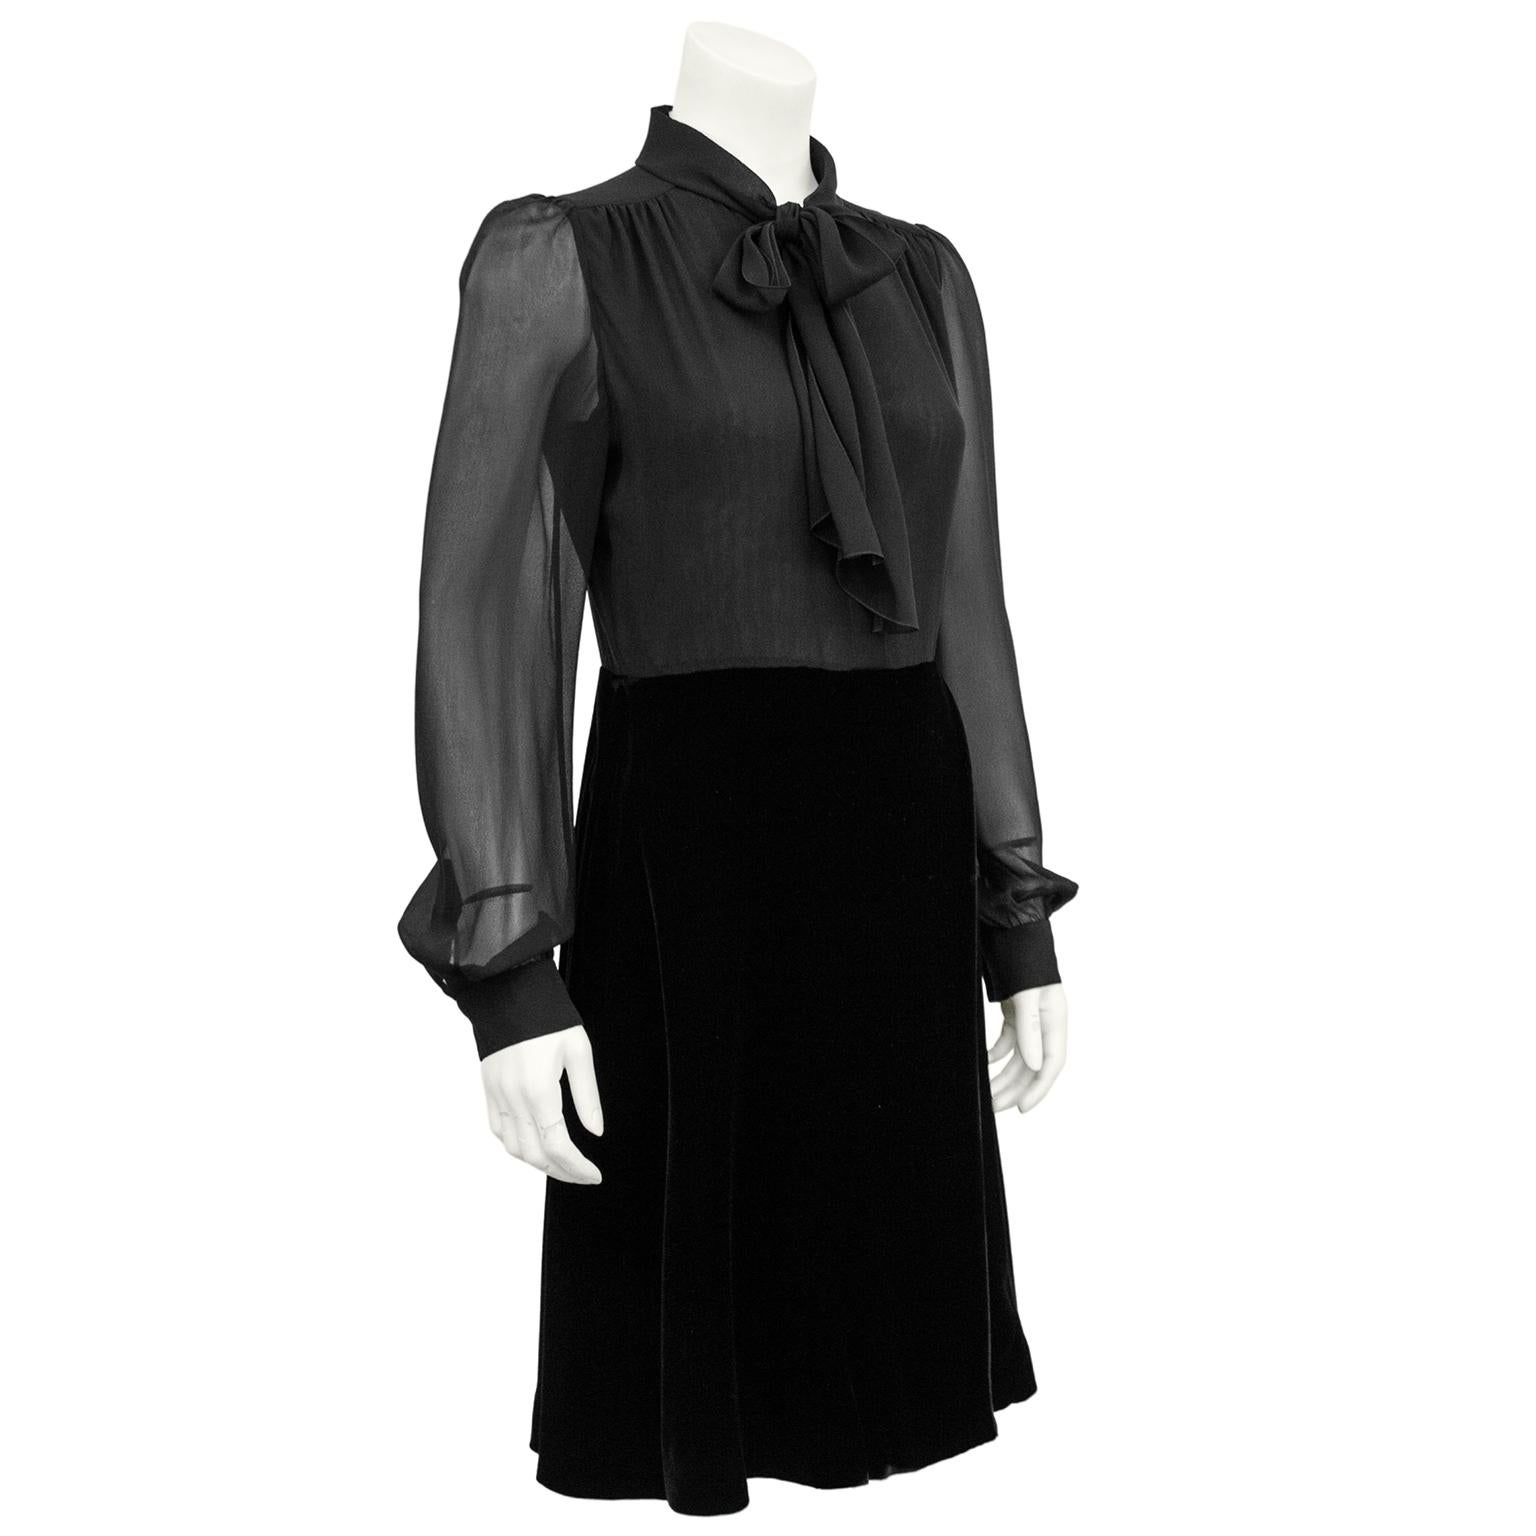 Amazing 1990s Valentino little black shirt dress from Holt Renfrew Canada. Top is black chiffon with a pussy bow tie, sheer bishop sleeves and delicate ruching at shoulders. Jet black a line wrap style velvet skirt with a panel of black chiffon that